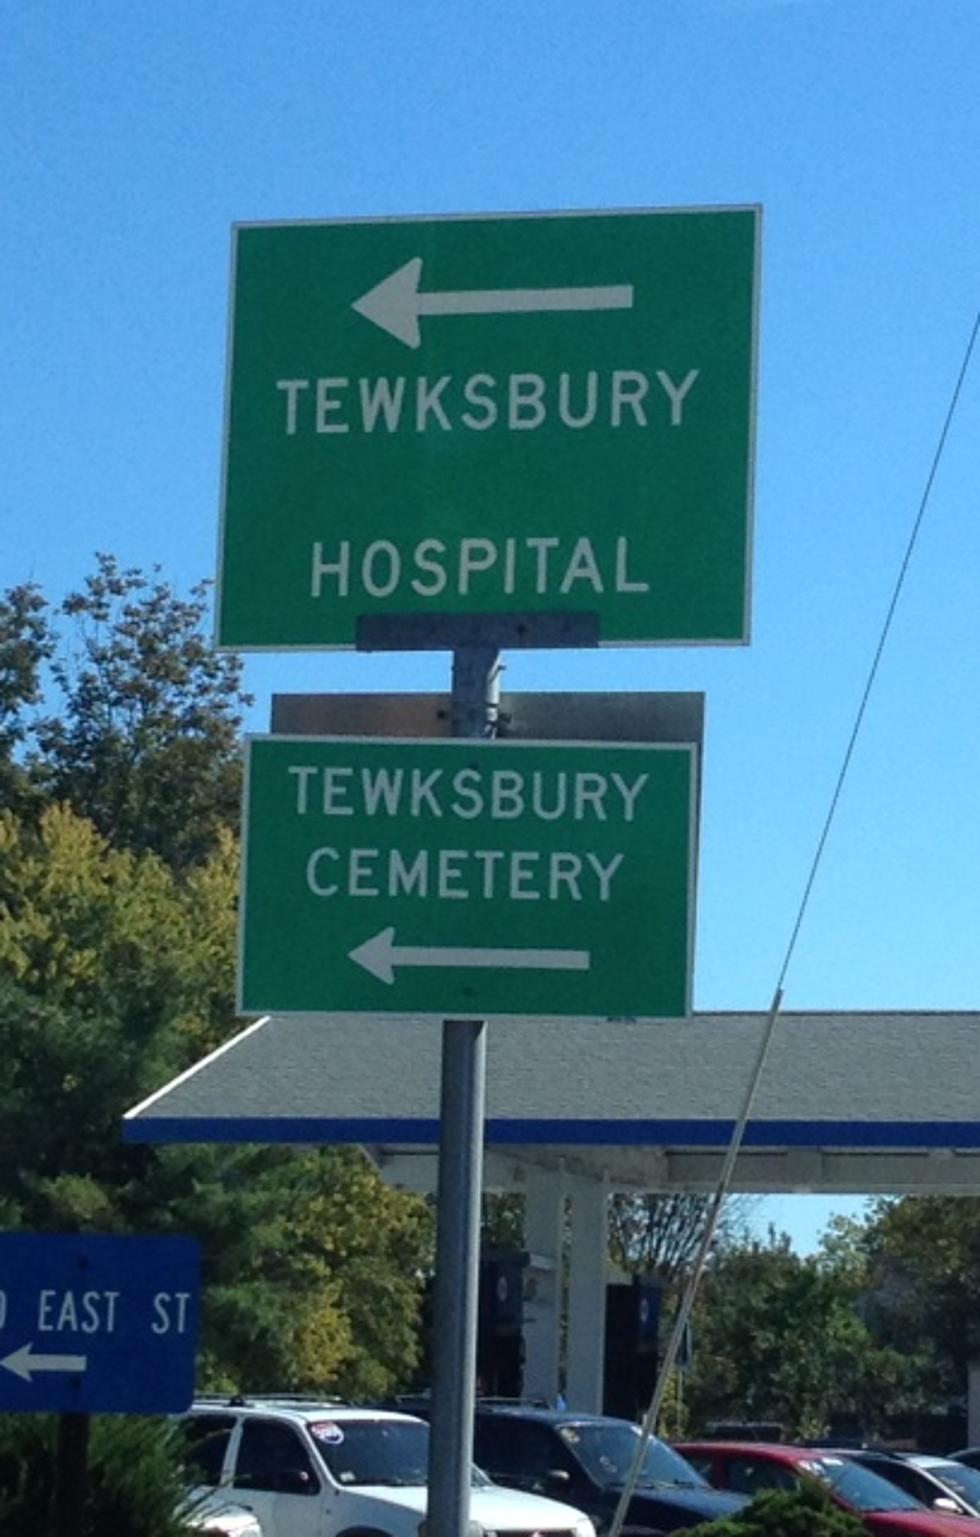 Came Across This Interesting Combination While In Tewksbury